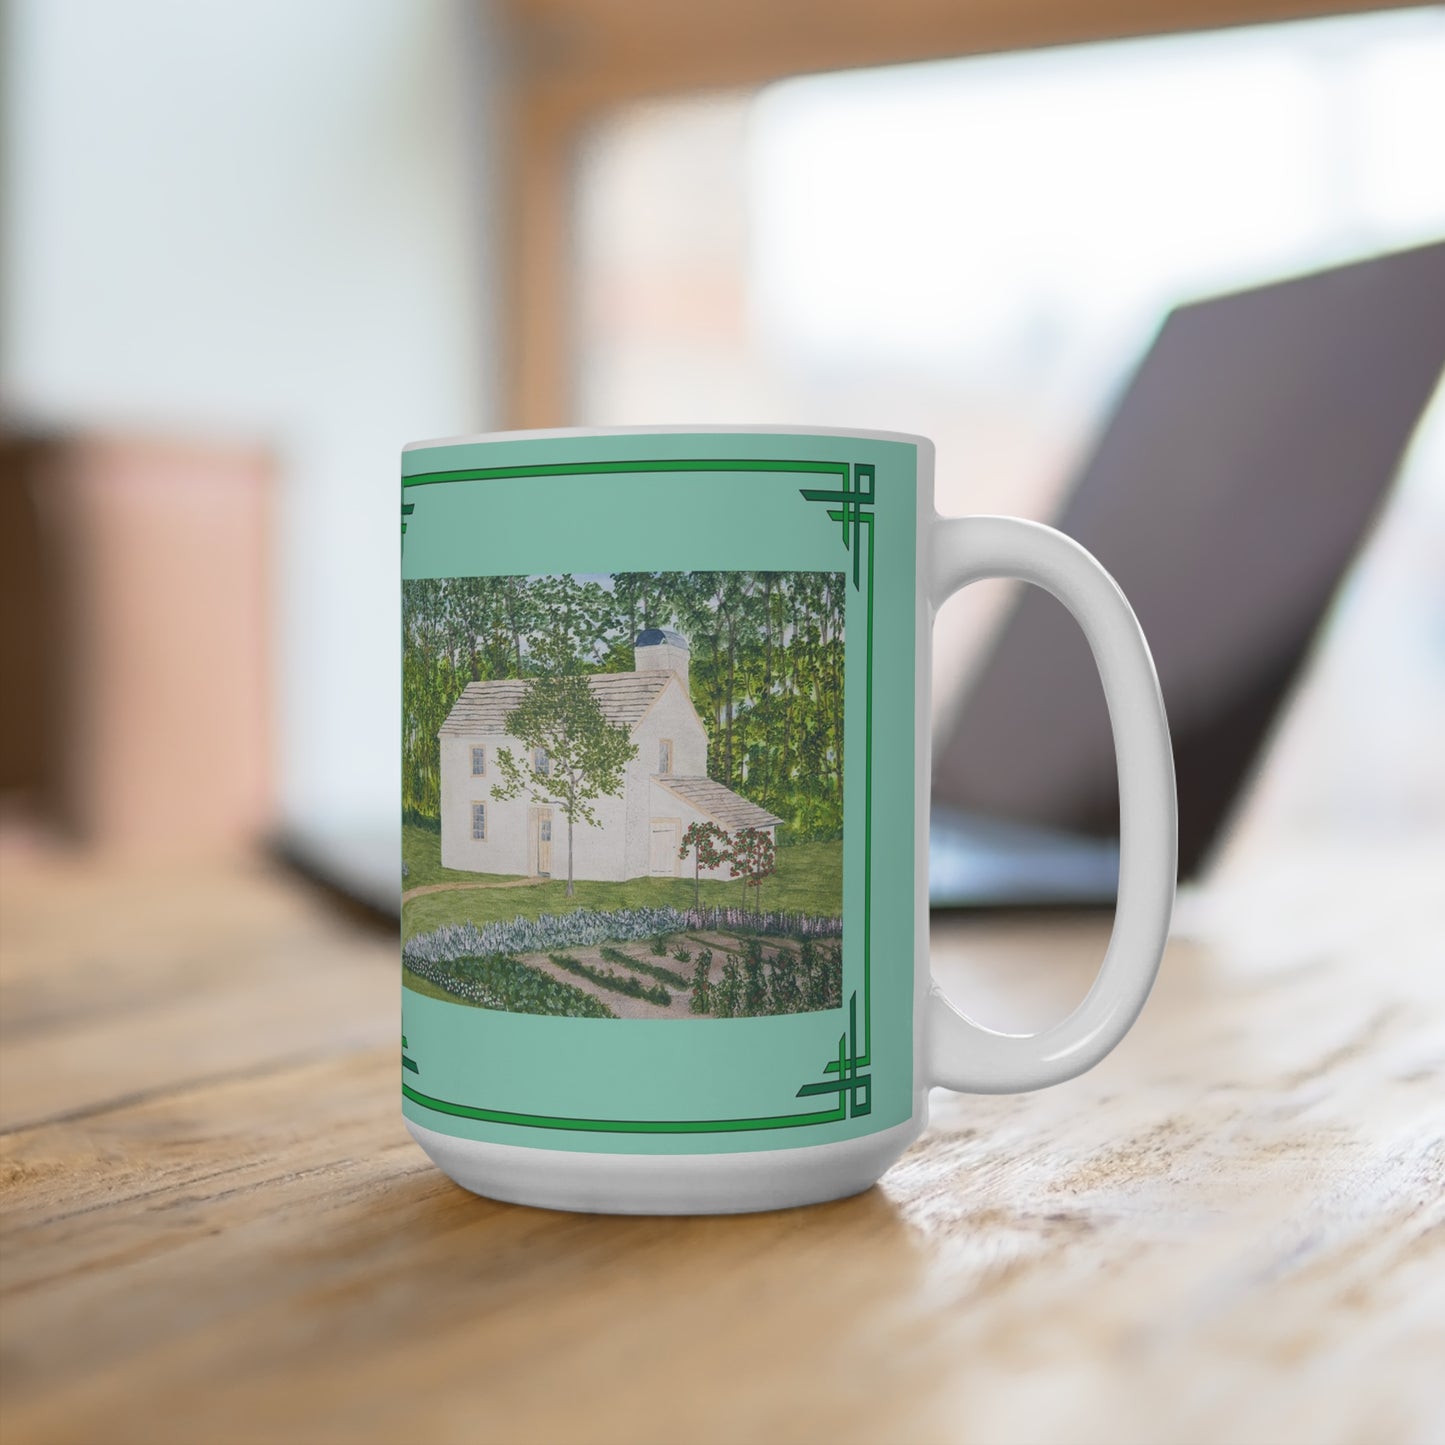 The Country Garden 15 oz. Mug features a reproduction of a watercolor painting by artist Lee M. Buchanan. Enjoy your favorite beverage in   the mug when you work on your laptop.